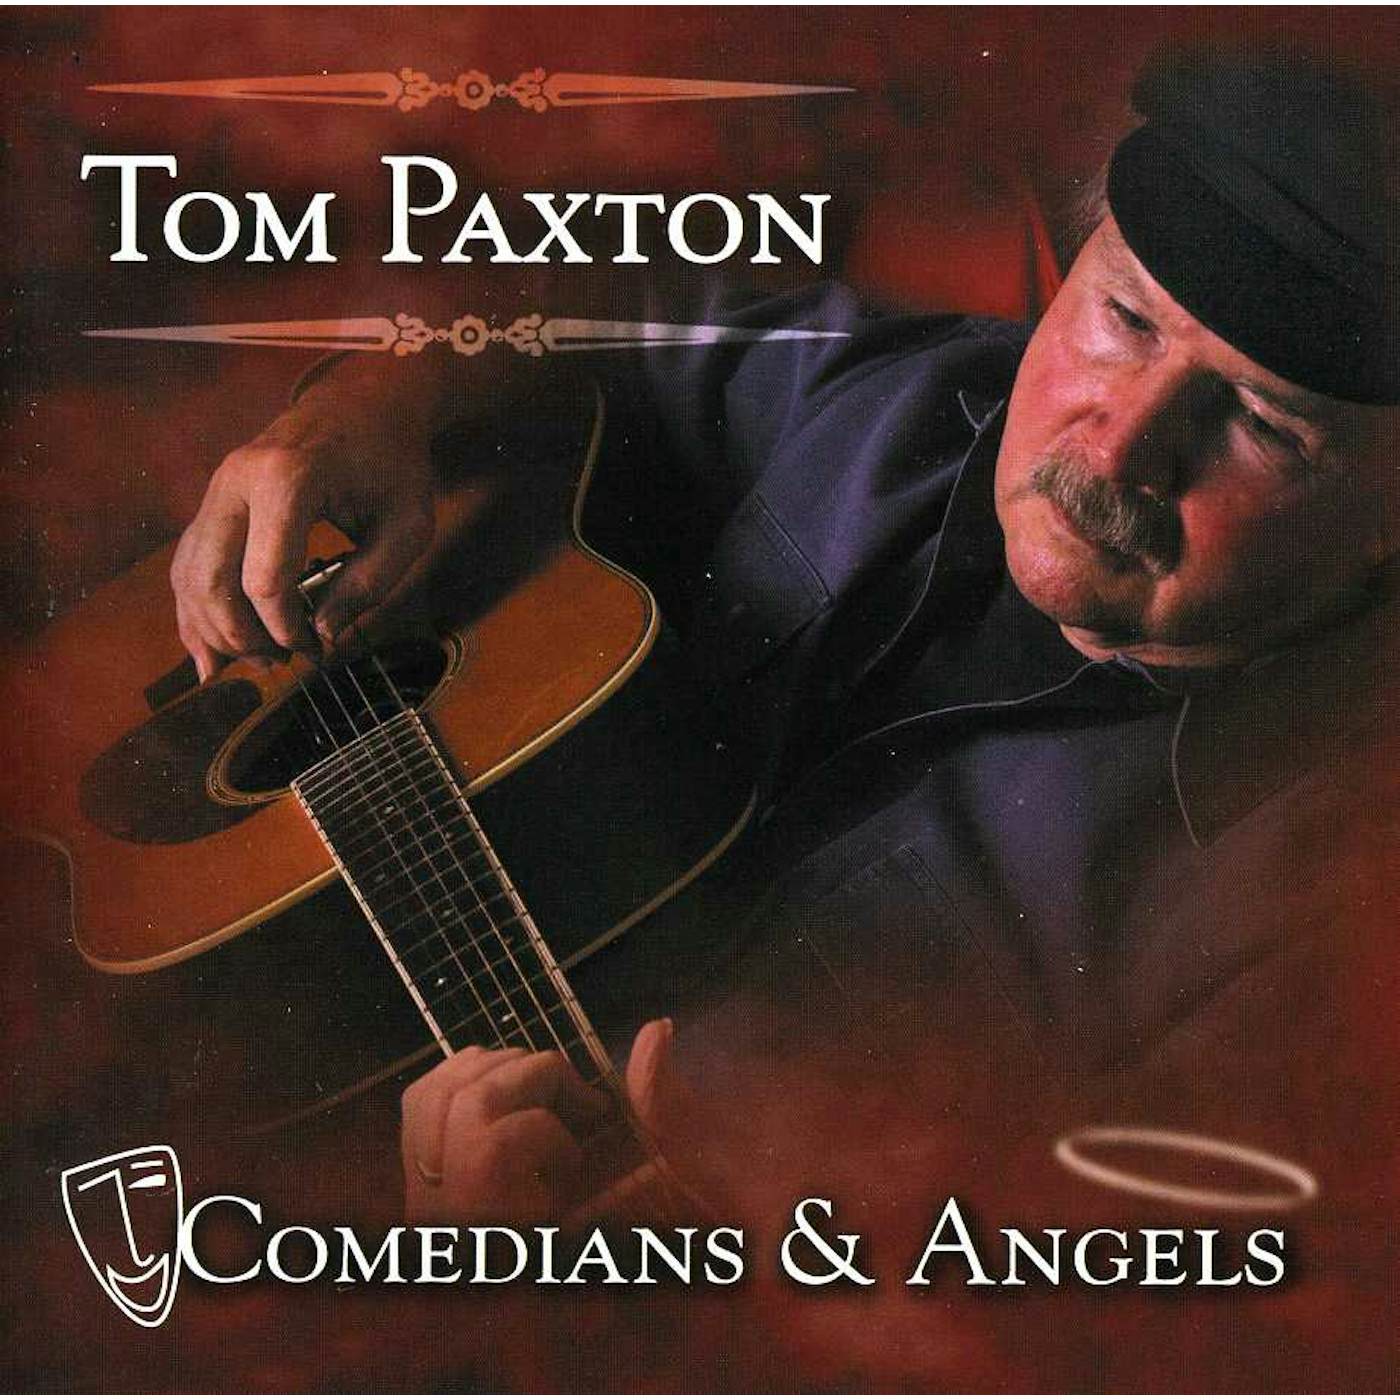 Tom Paxton COMEDIANS & ANGELS CD